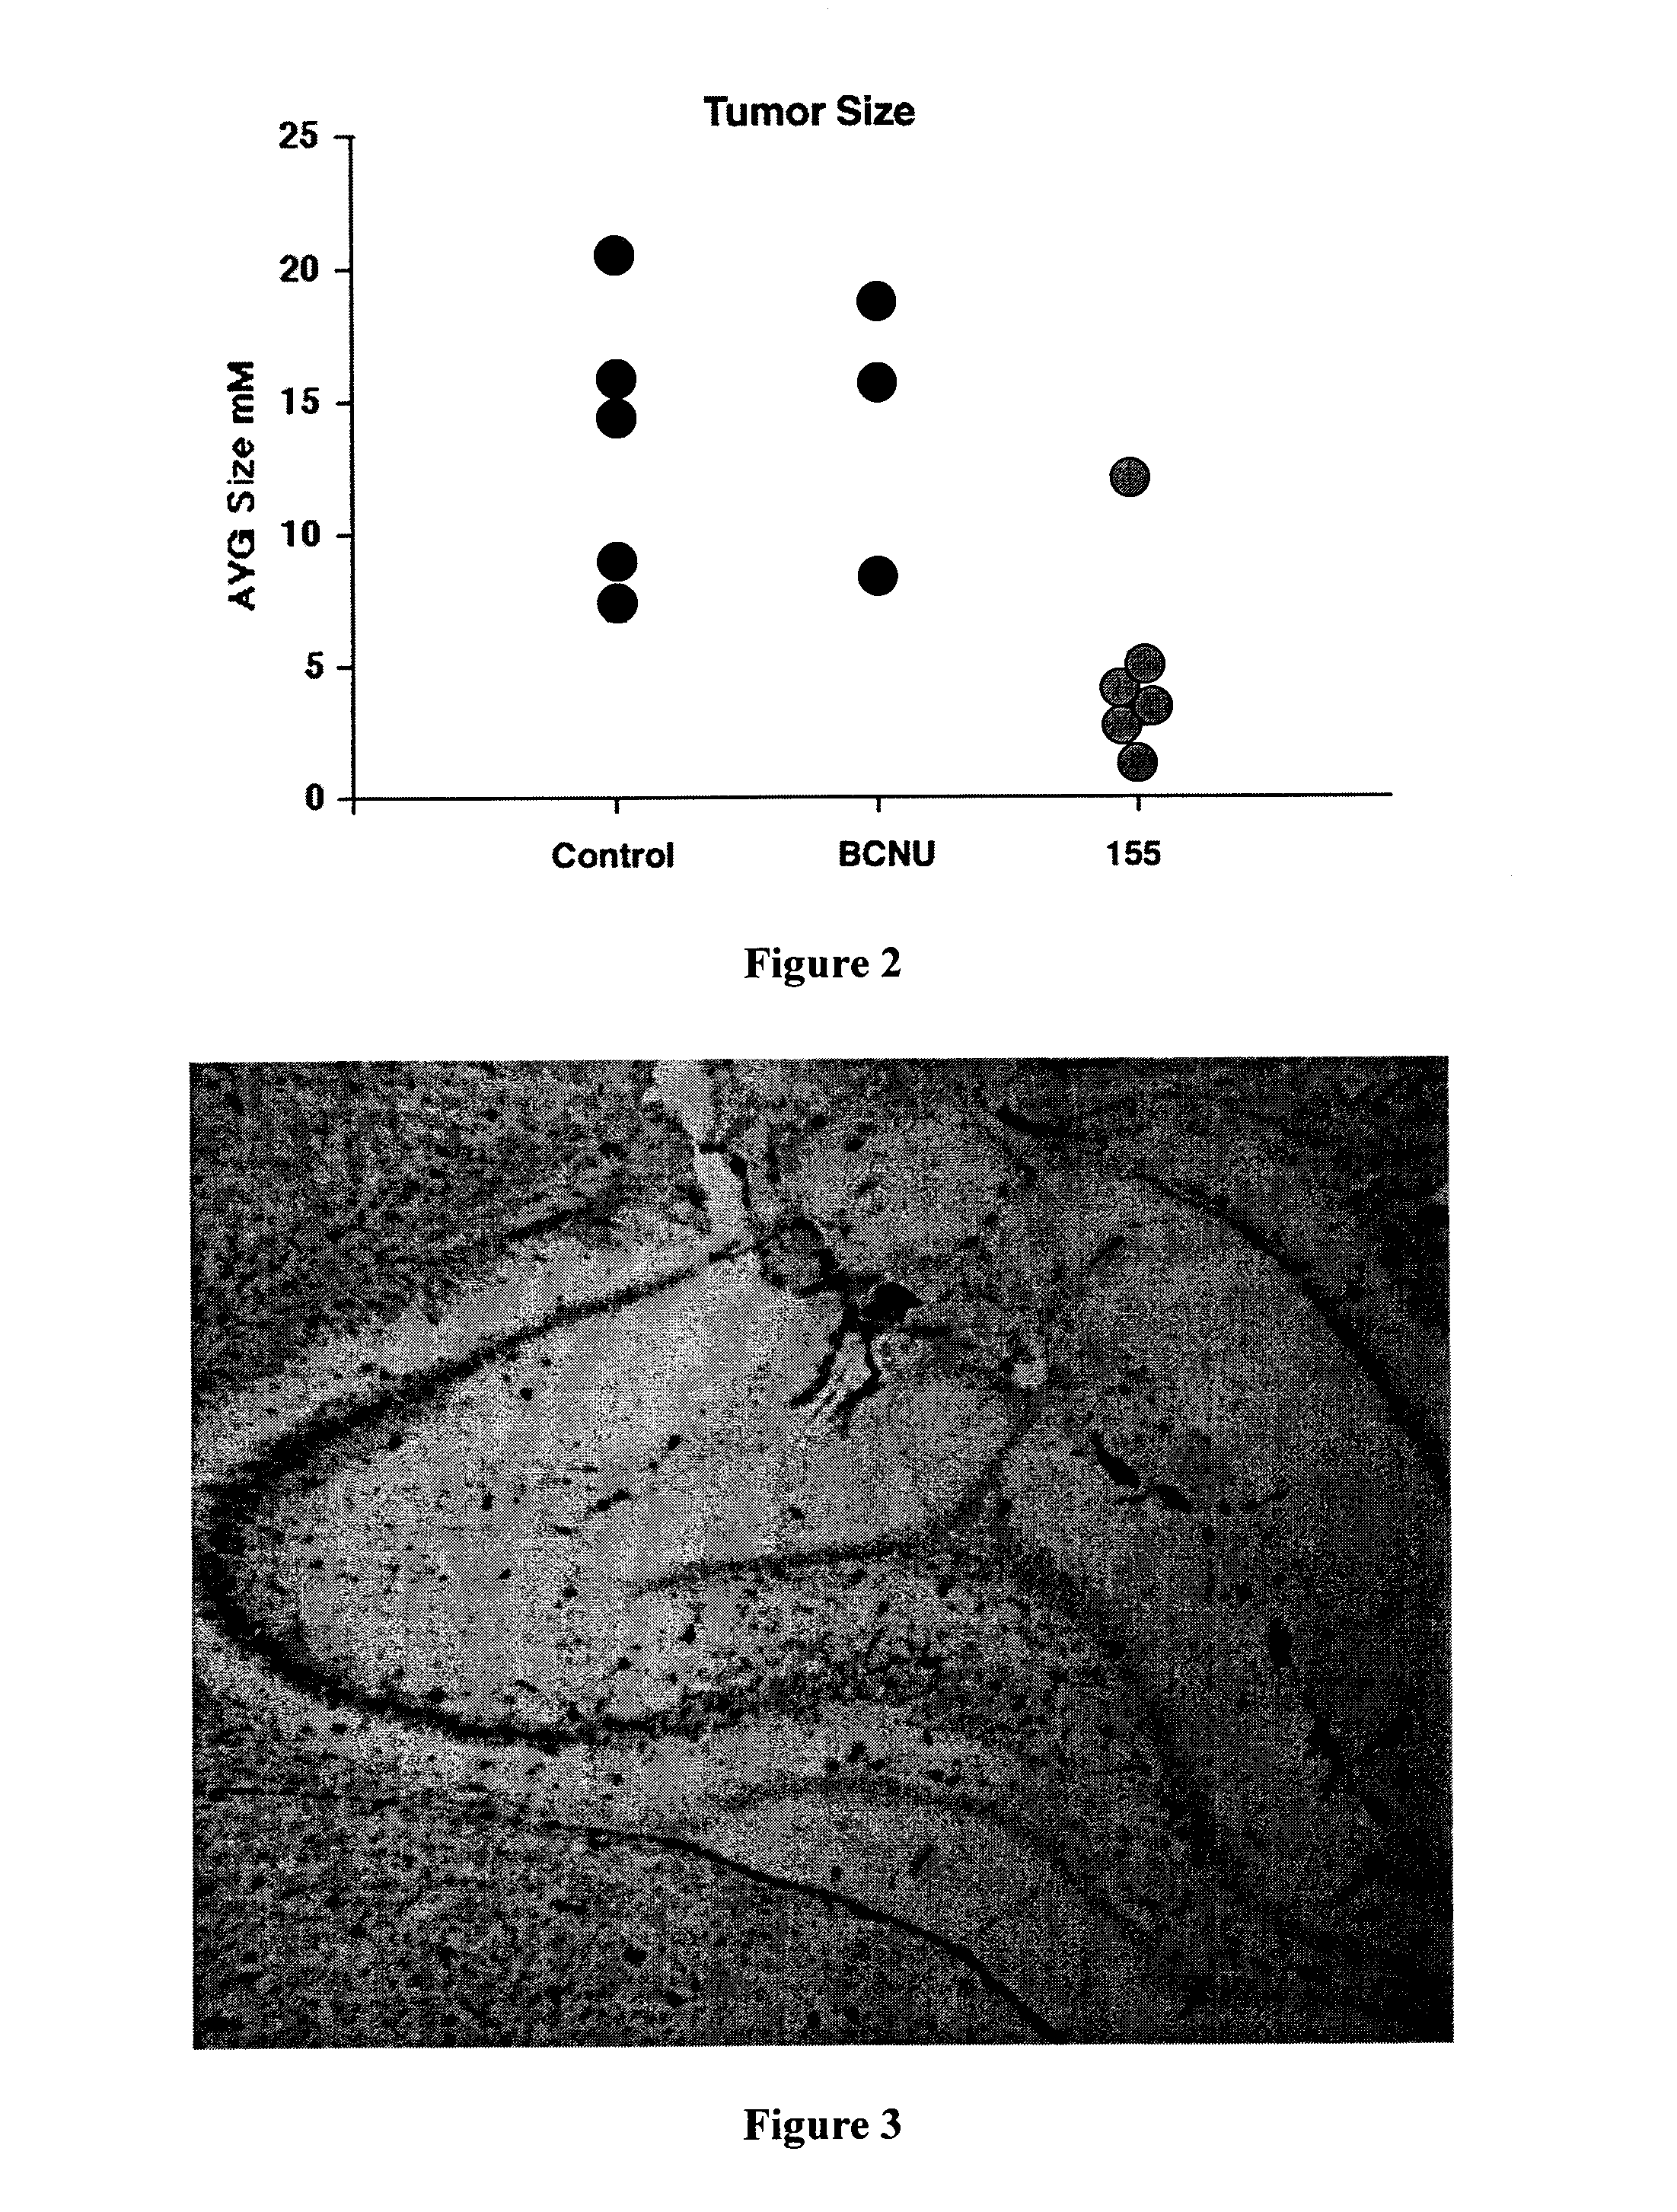 Substituted Tetrahydroisoquinoline Compounds for Cancer Therapy